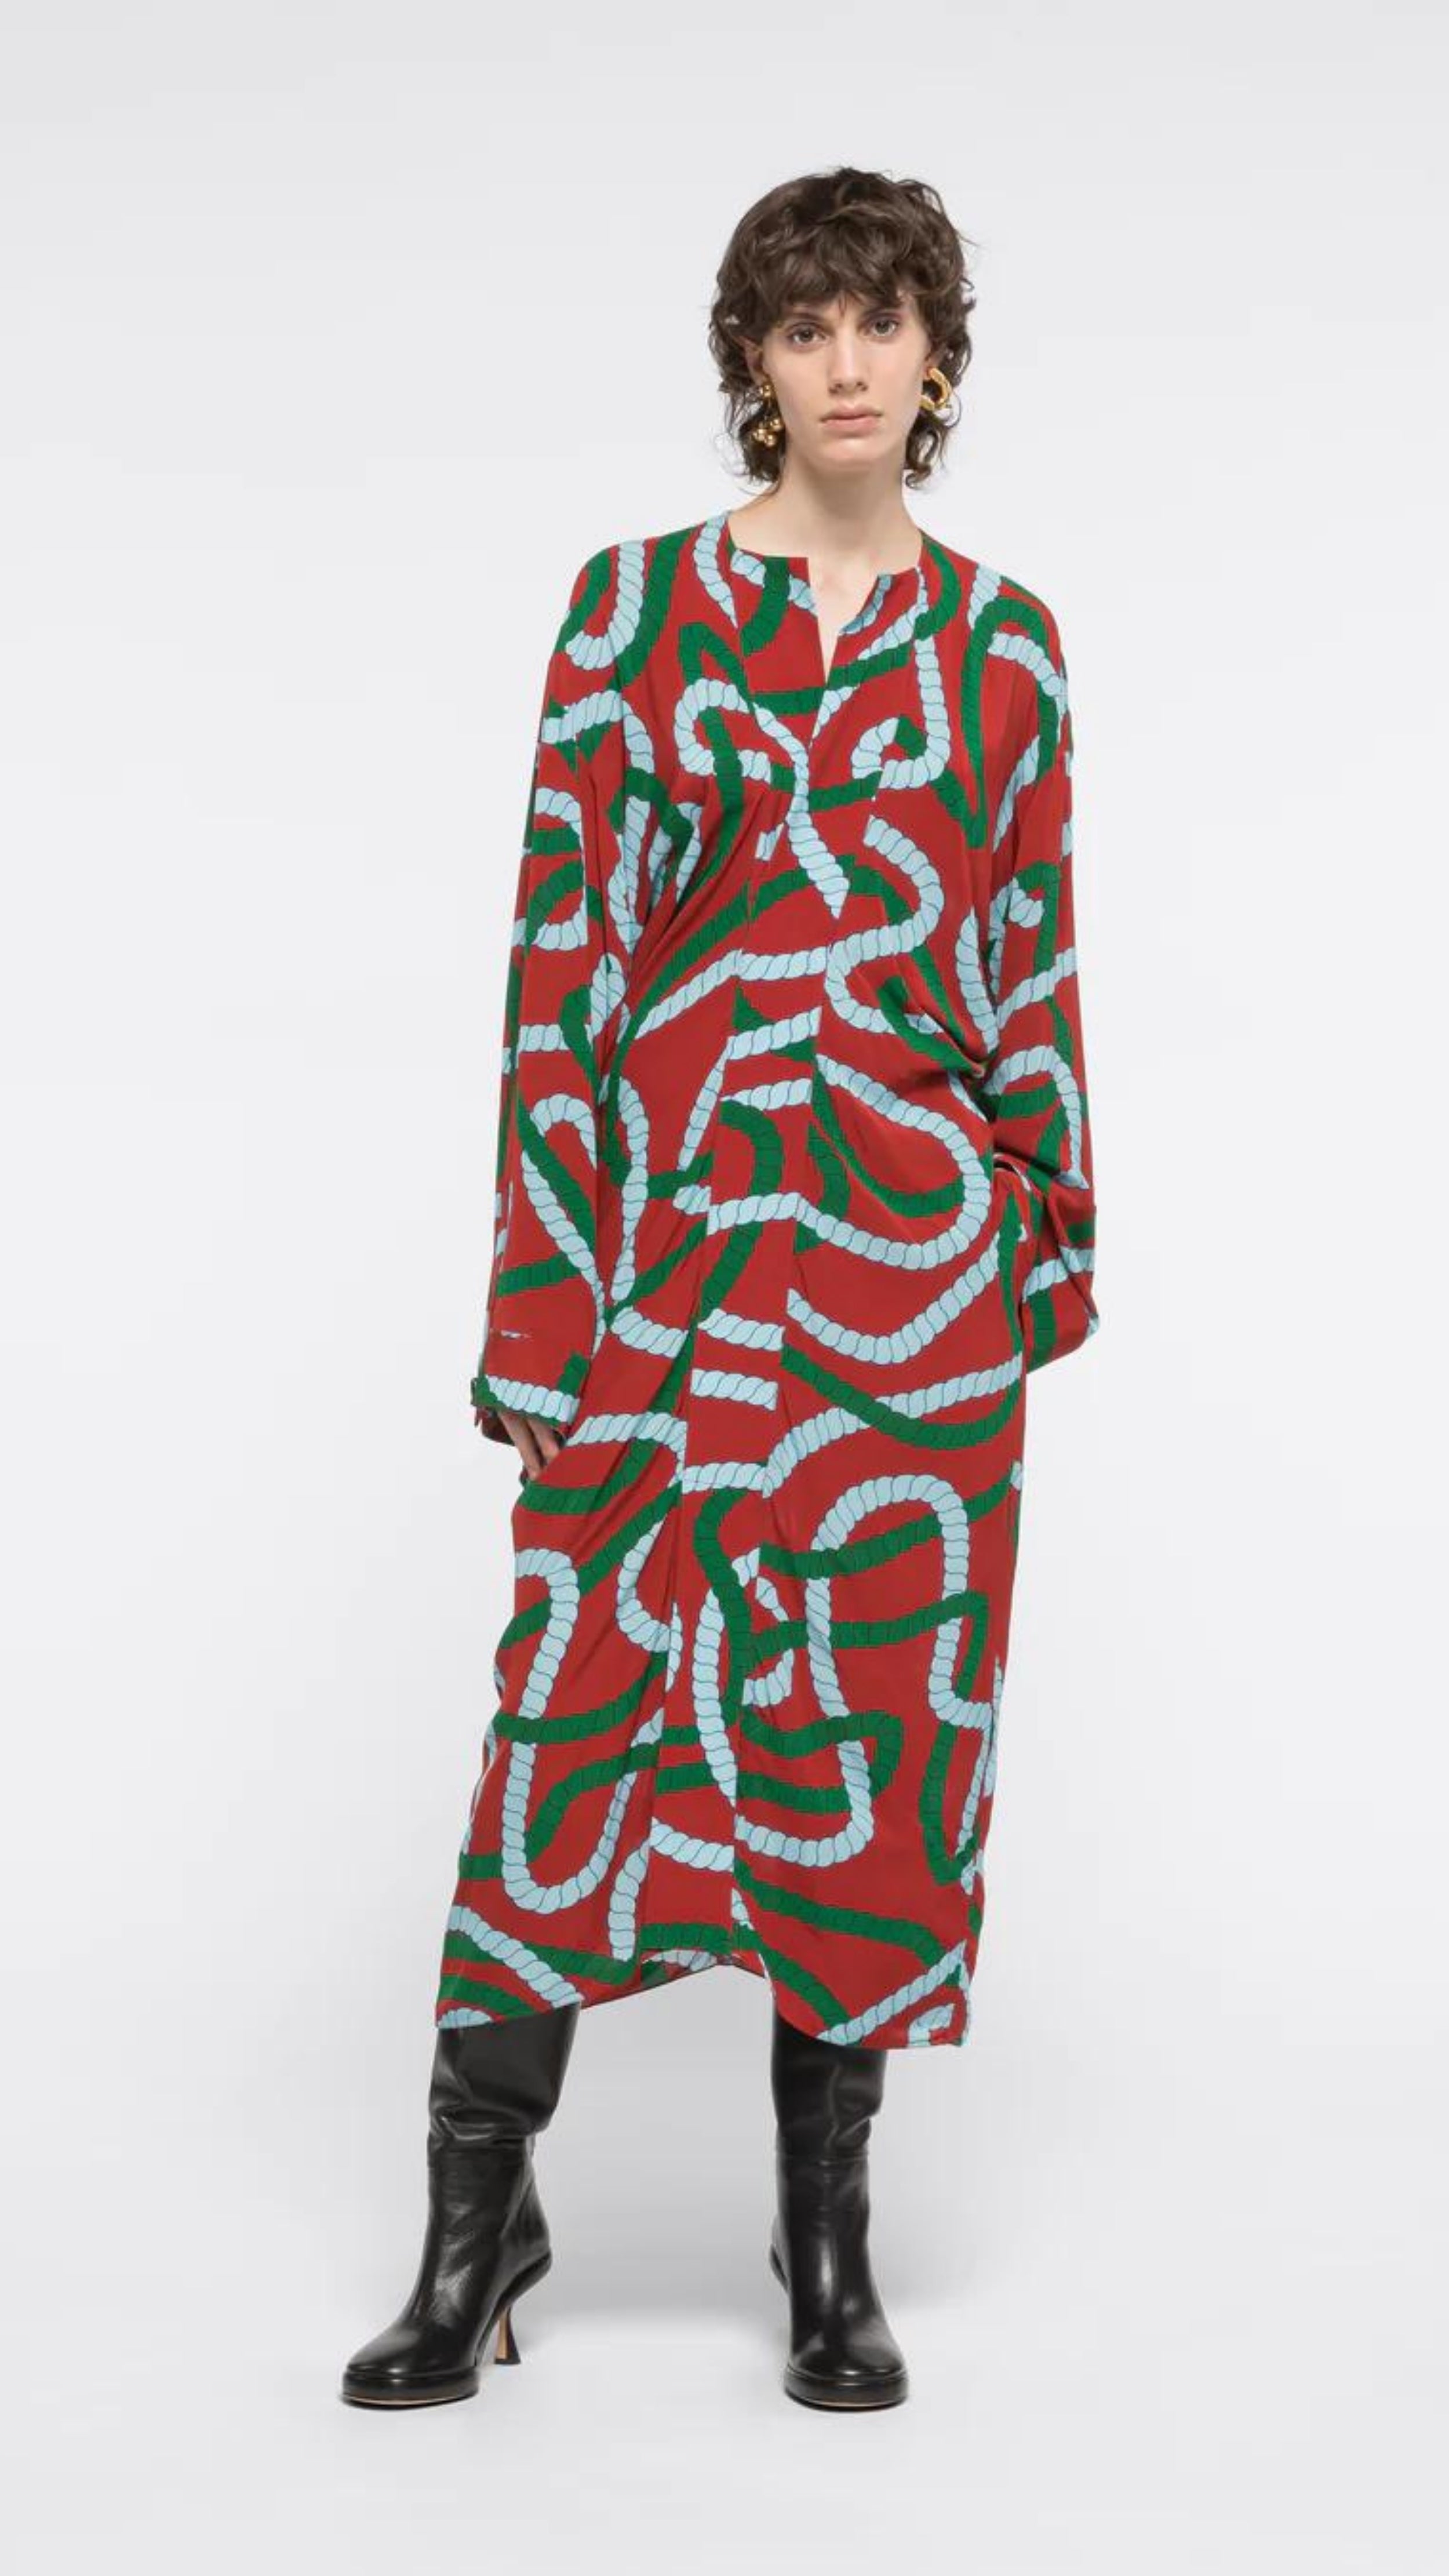 AZ Factory Colville Molly Molloy Lucinda Chambers, Printed Draped Midi Dress. Midi dress with long sleeves and a v cut neckline. It's a rust red with intertwining  rope pattern in green and sky blue. Shown on model facing front.